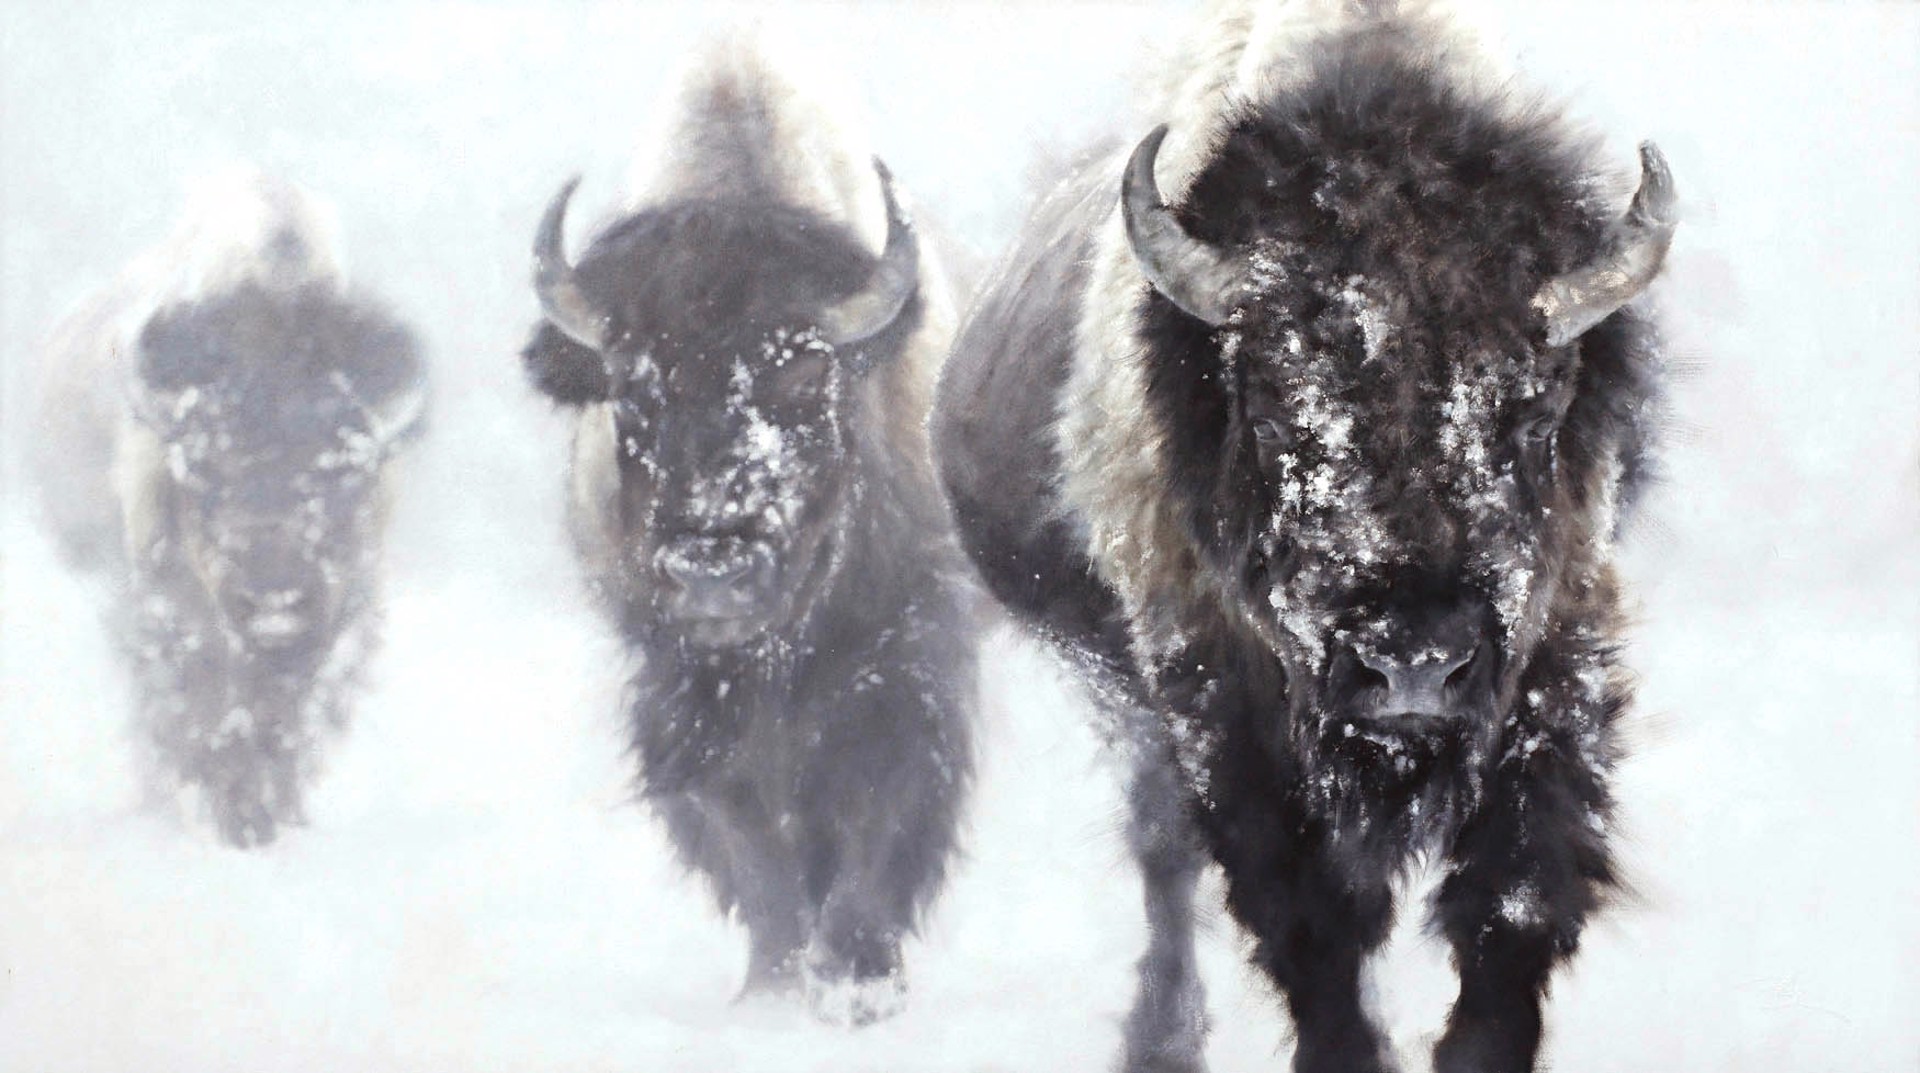 Original Oil Painting Featuring Three Walking Bison On Snowy Hazy White Background